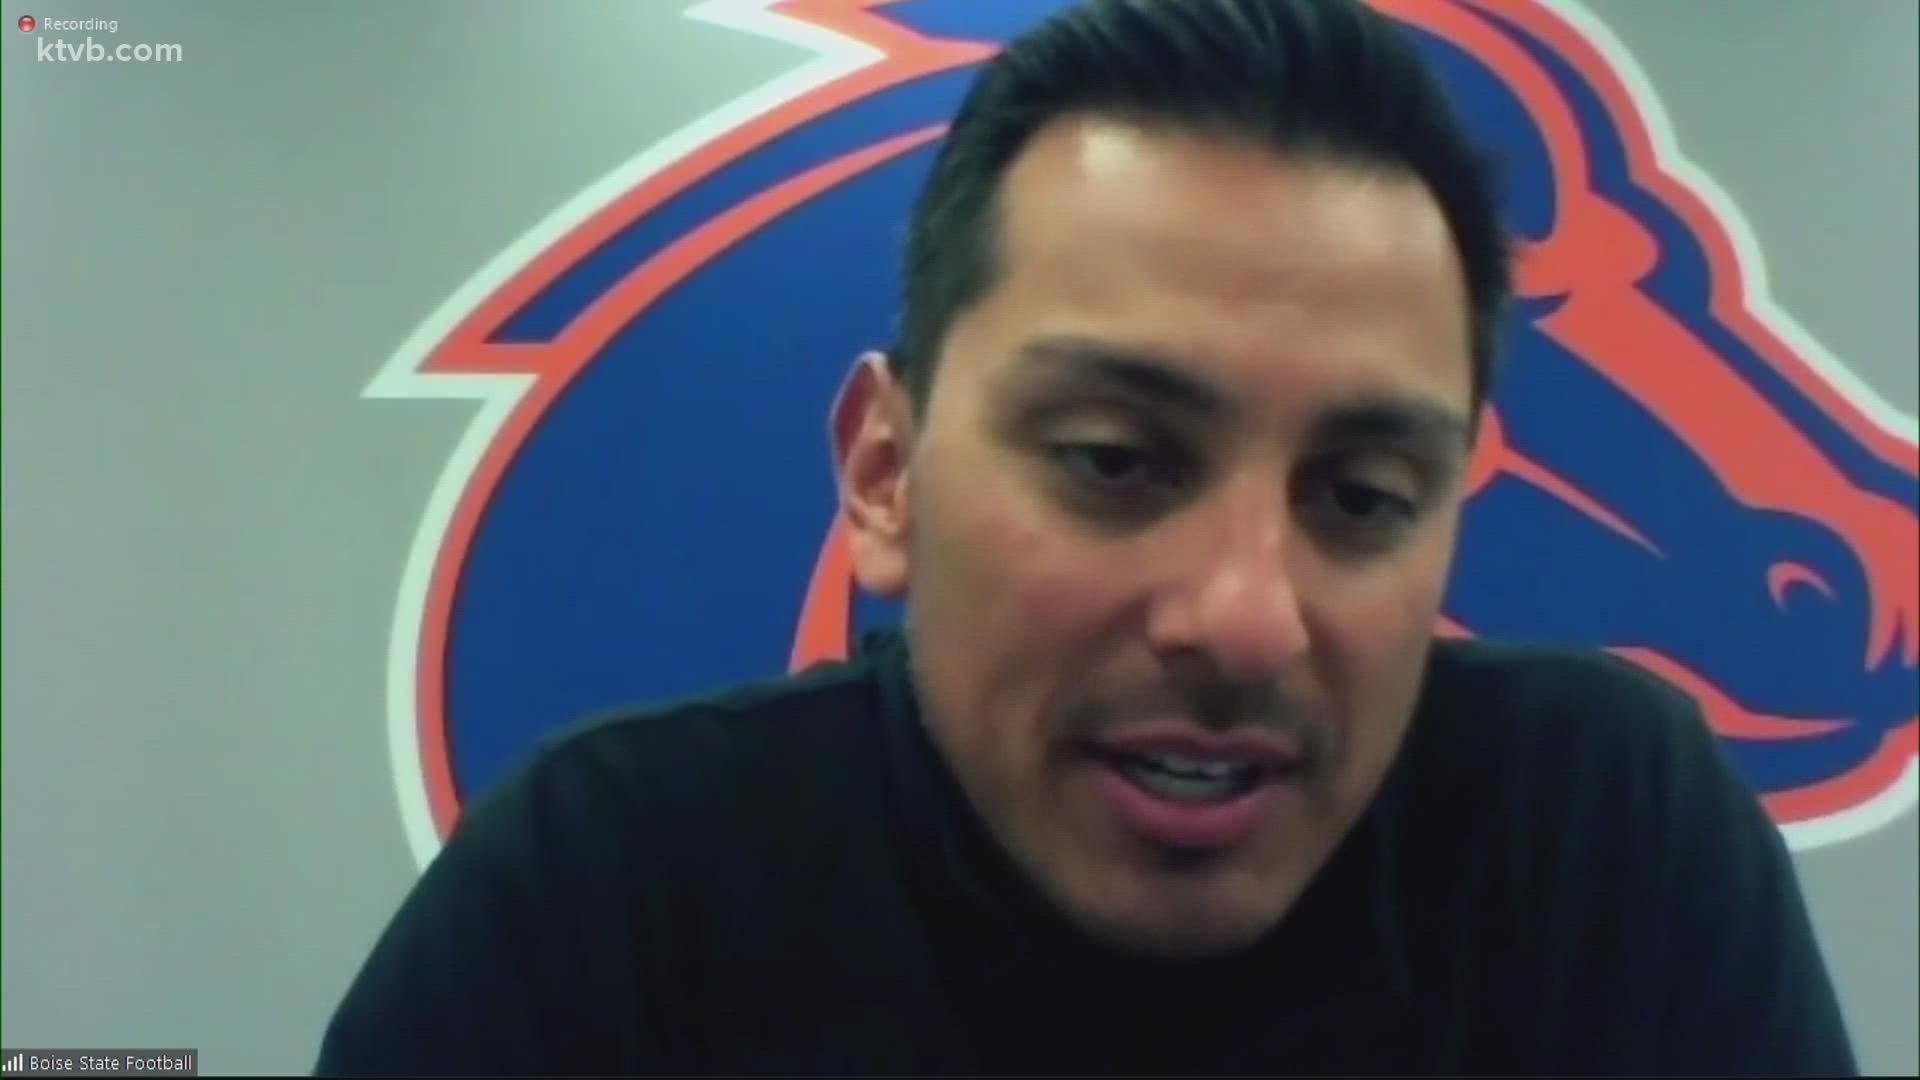 On Monday, head coach Andy Avalos held his weekly press conference on the Broncos' conference game against Wyoming.